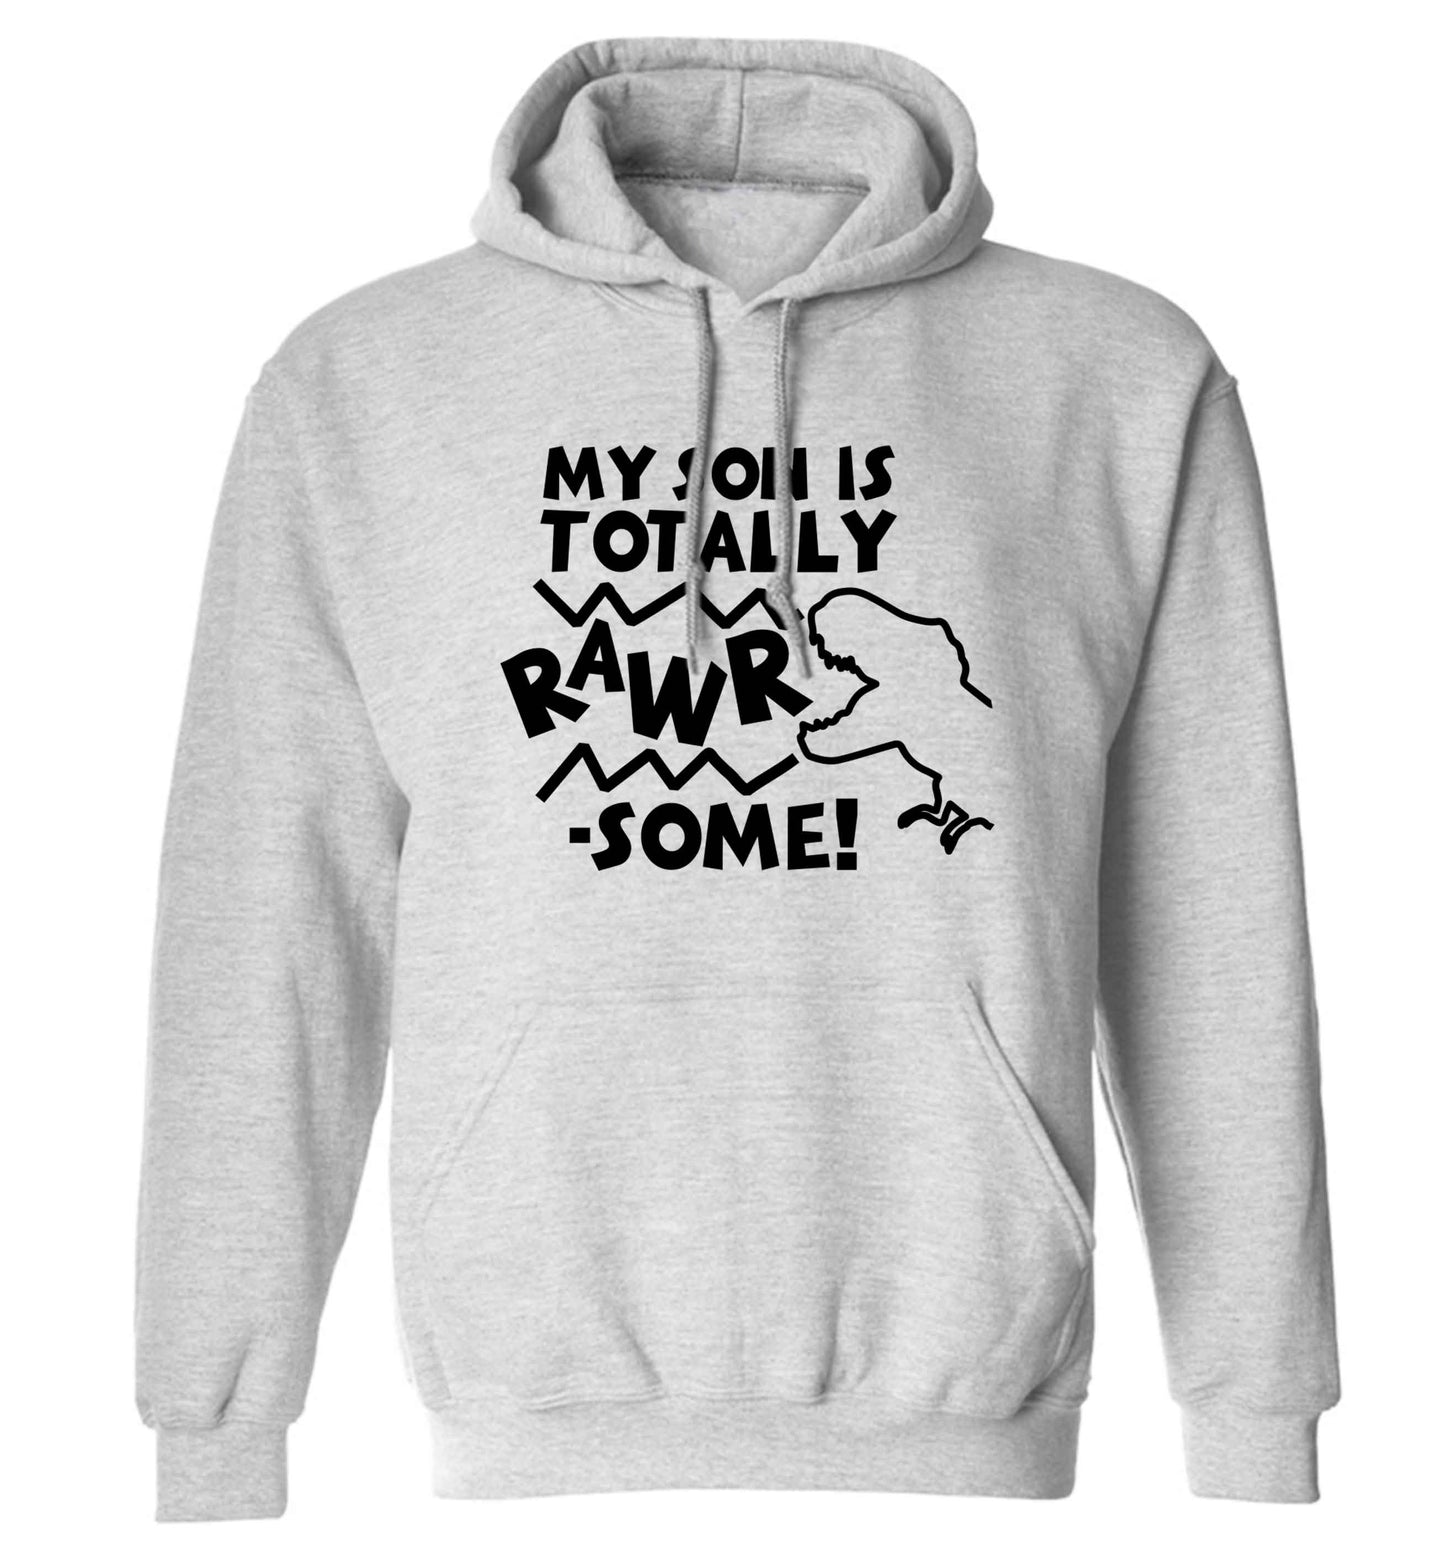 My son is totally rawrsome adults unisex grey hoodie 2XL